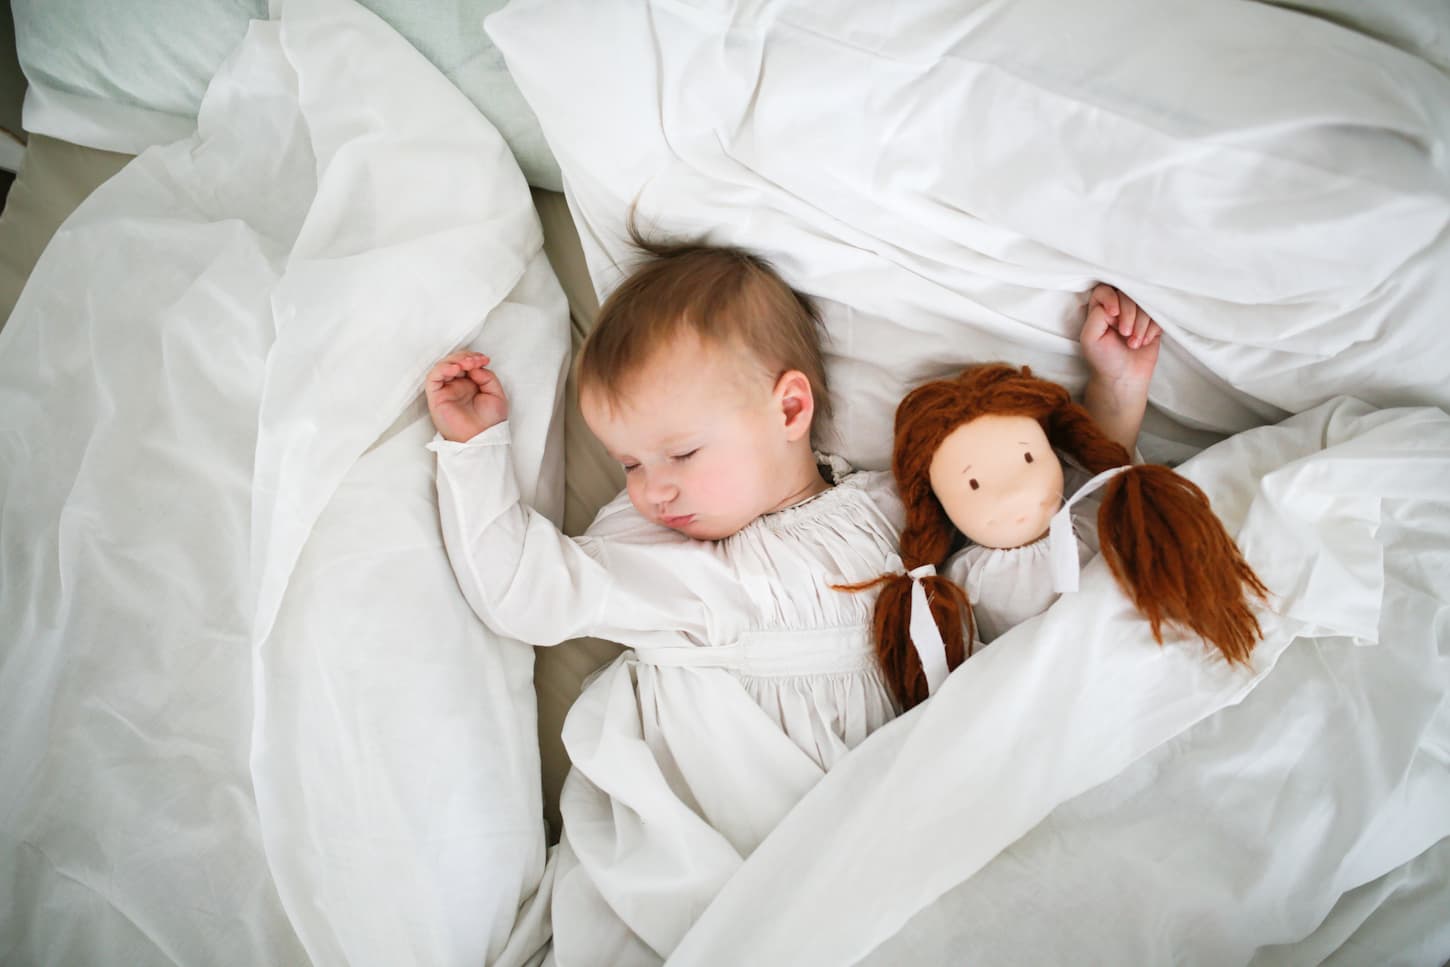 An image of a sick baby lying in bed with a doll beside her while having bed rest during illness.